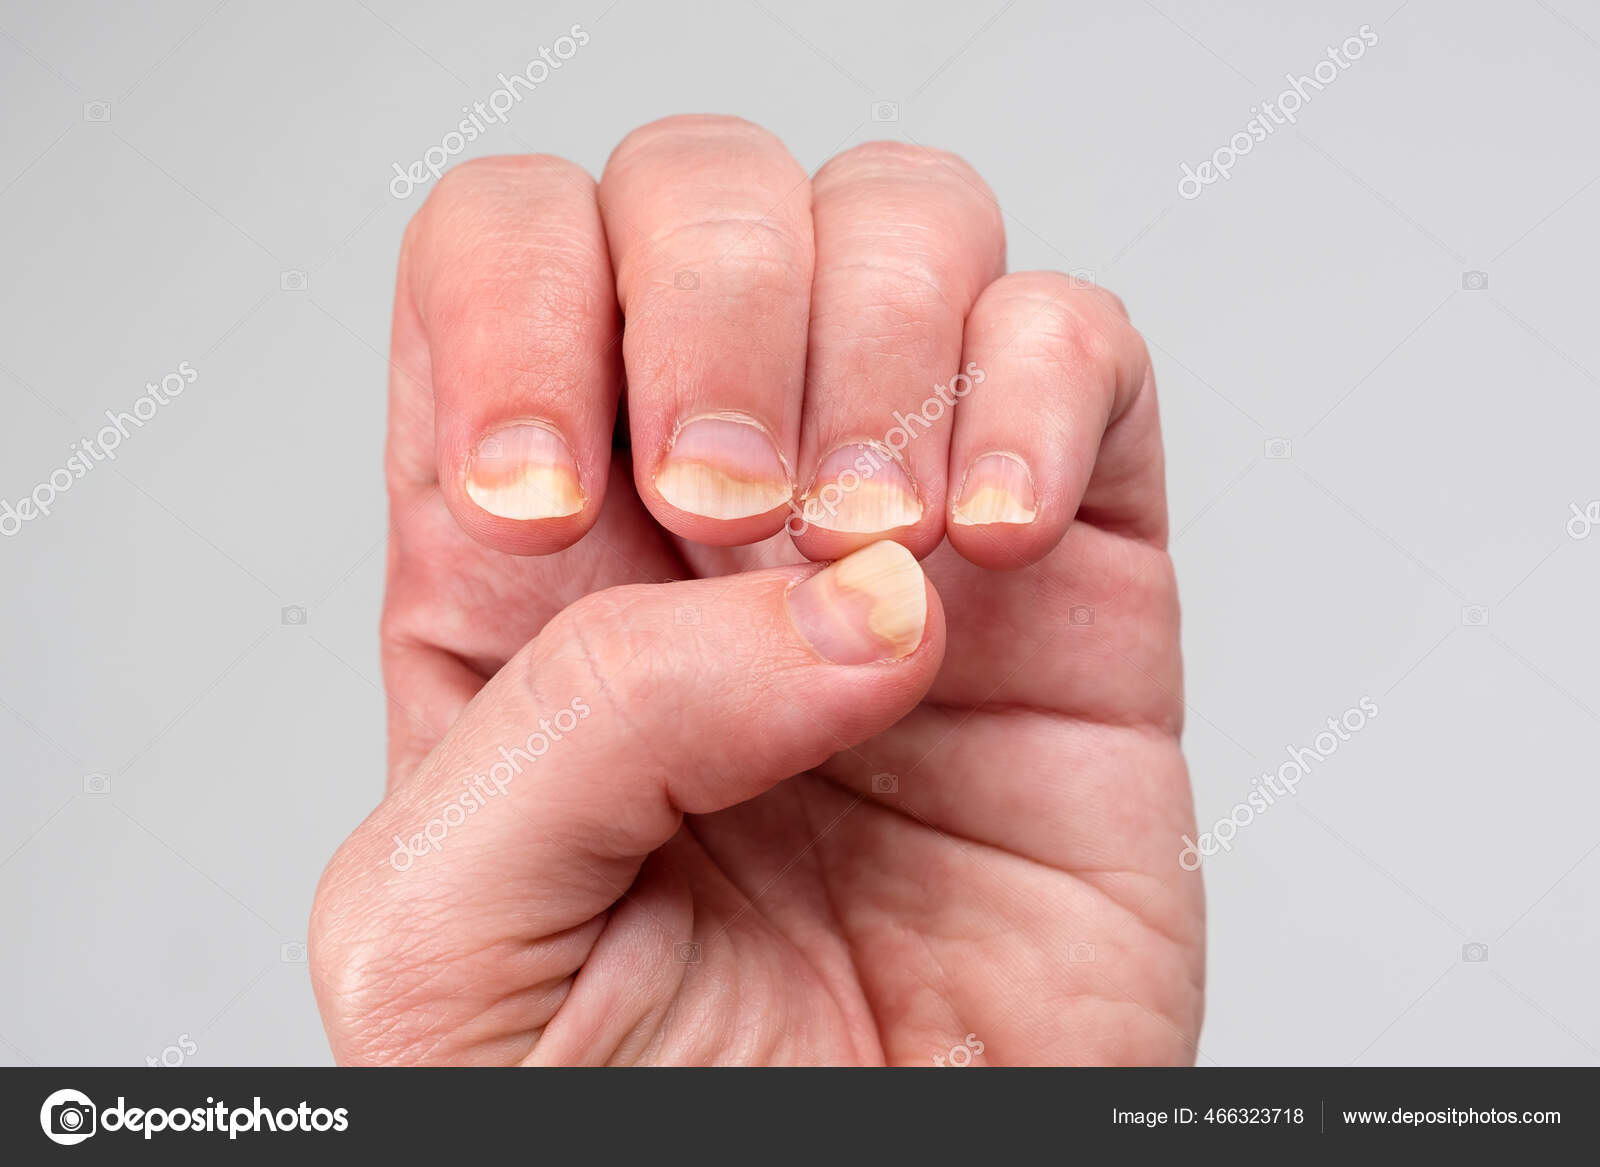 I damaged my nail bed a while back by hitting it on something. It healed  fine, but I noticed the bottom of my nail starting to peel. I kept picking  at it